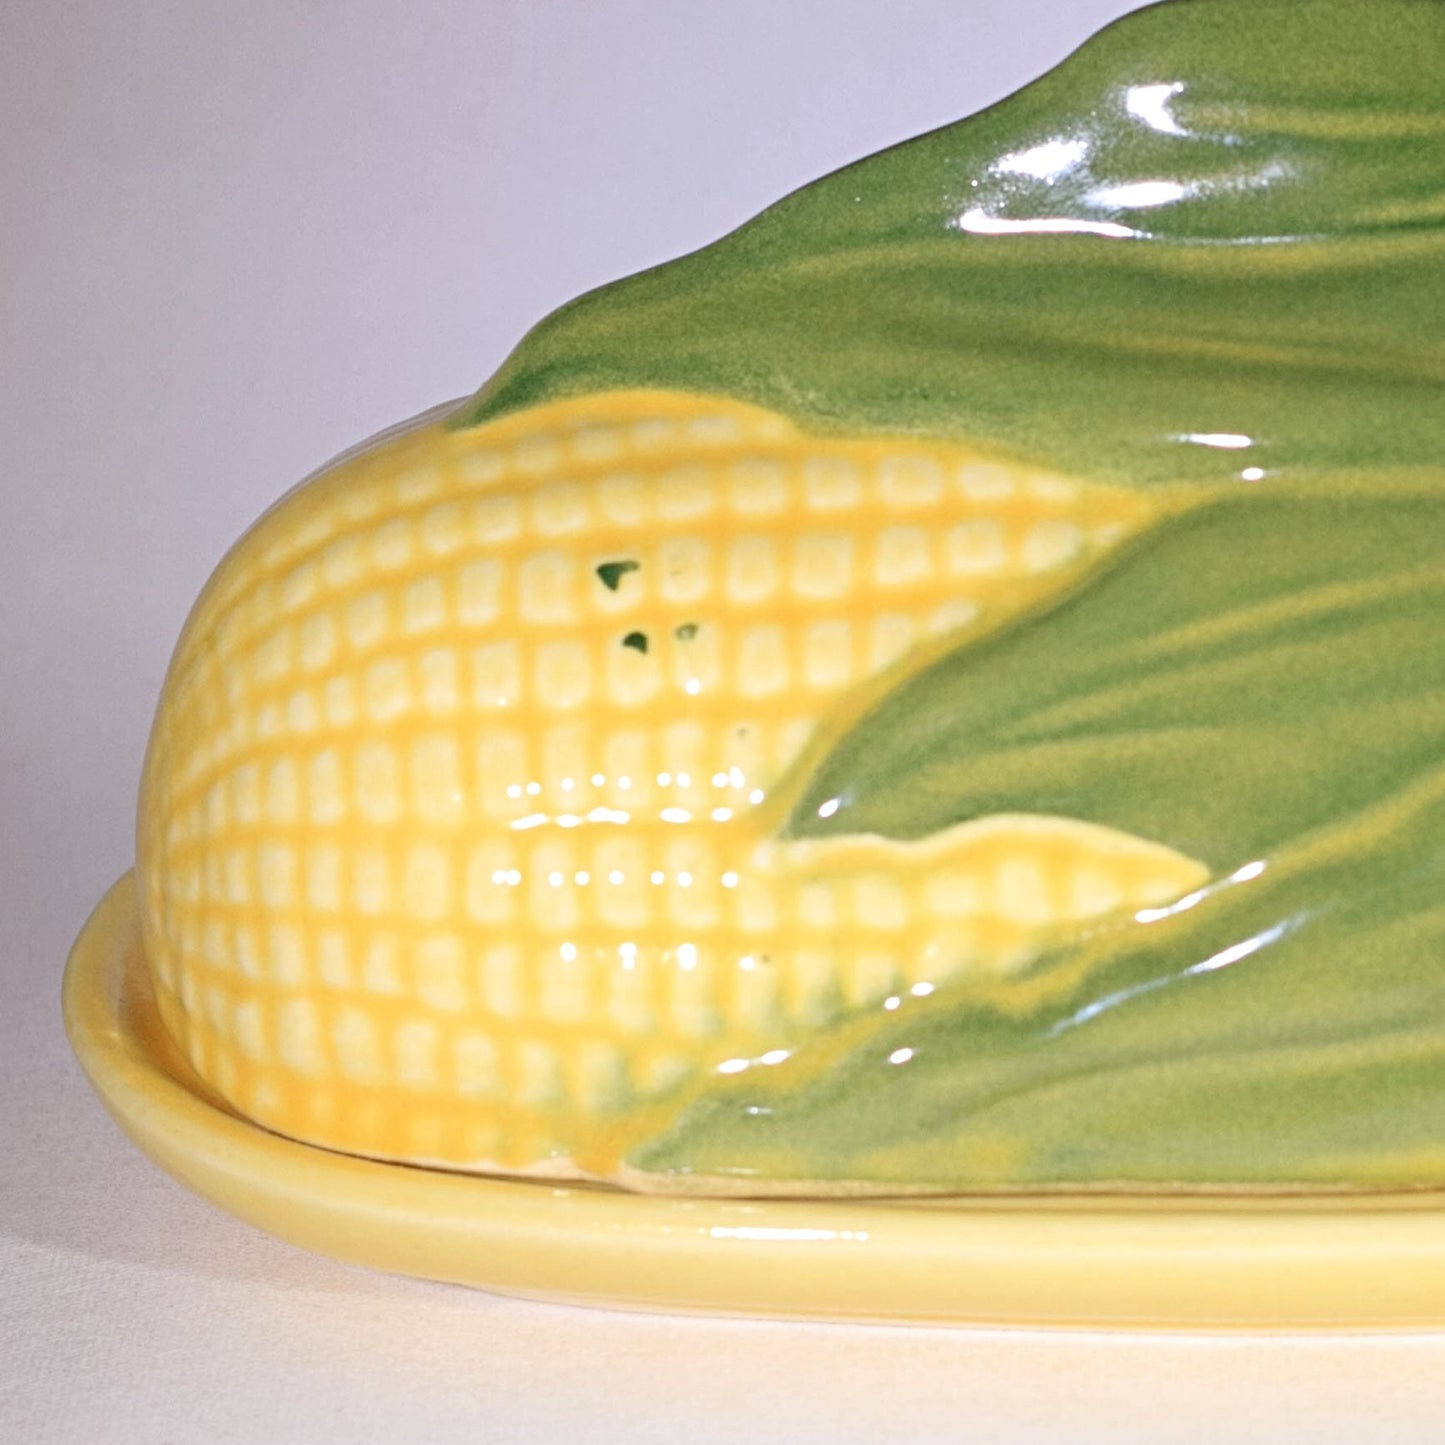 SHAWNEE Pottery CORN KING Covered Butter Dish